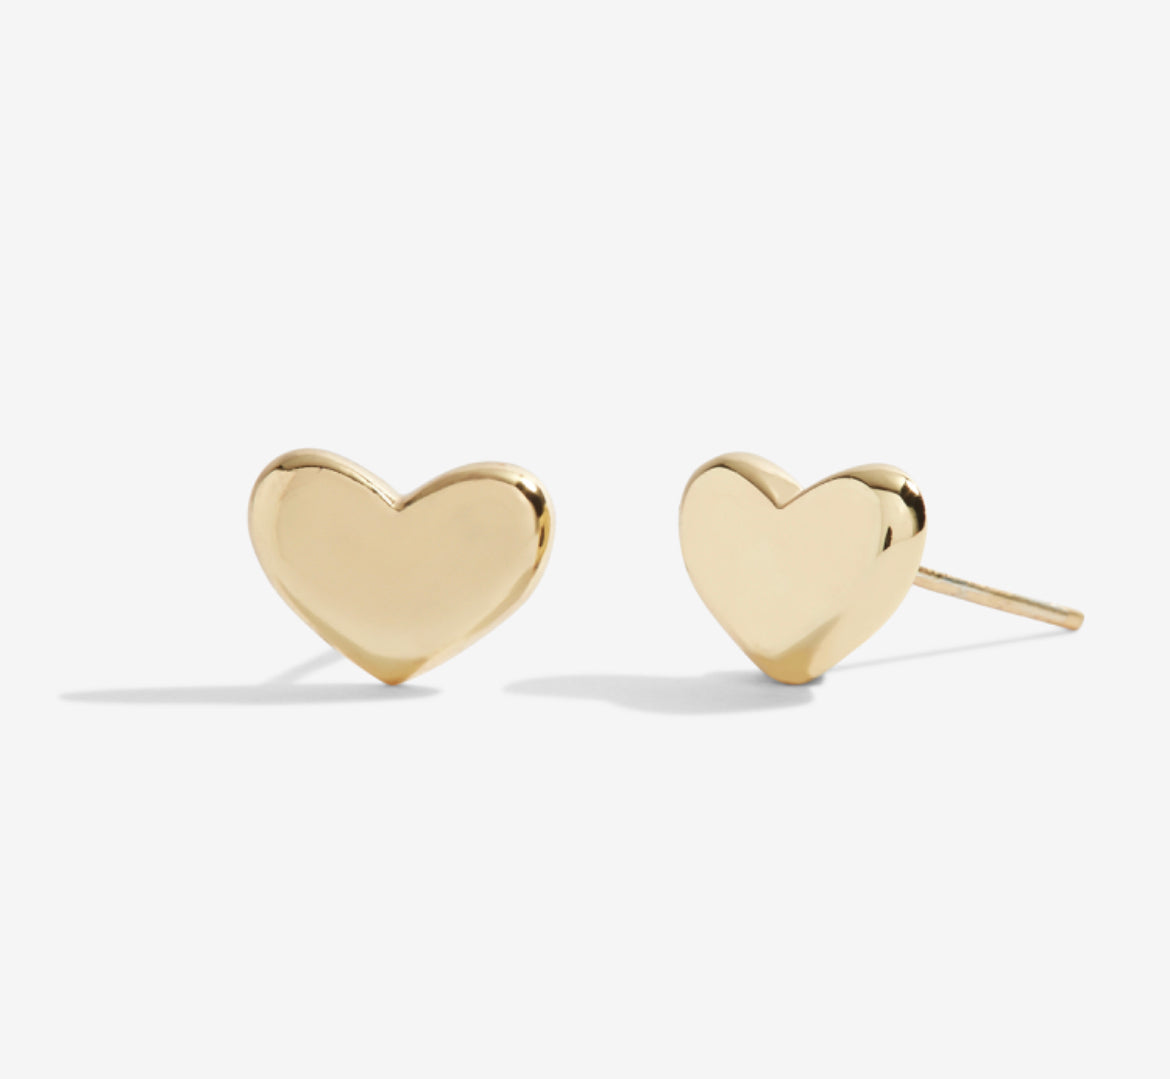 FLORENCE HEART STUD EARRINGS SILVER, ROSE GOLD SET OF 3